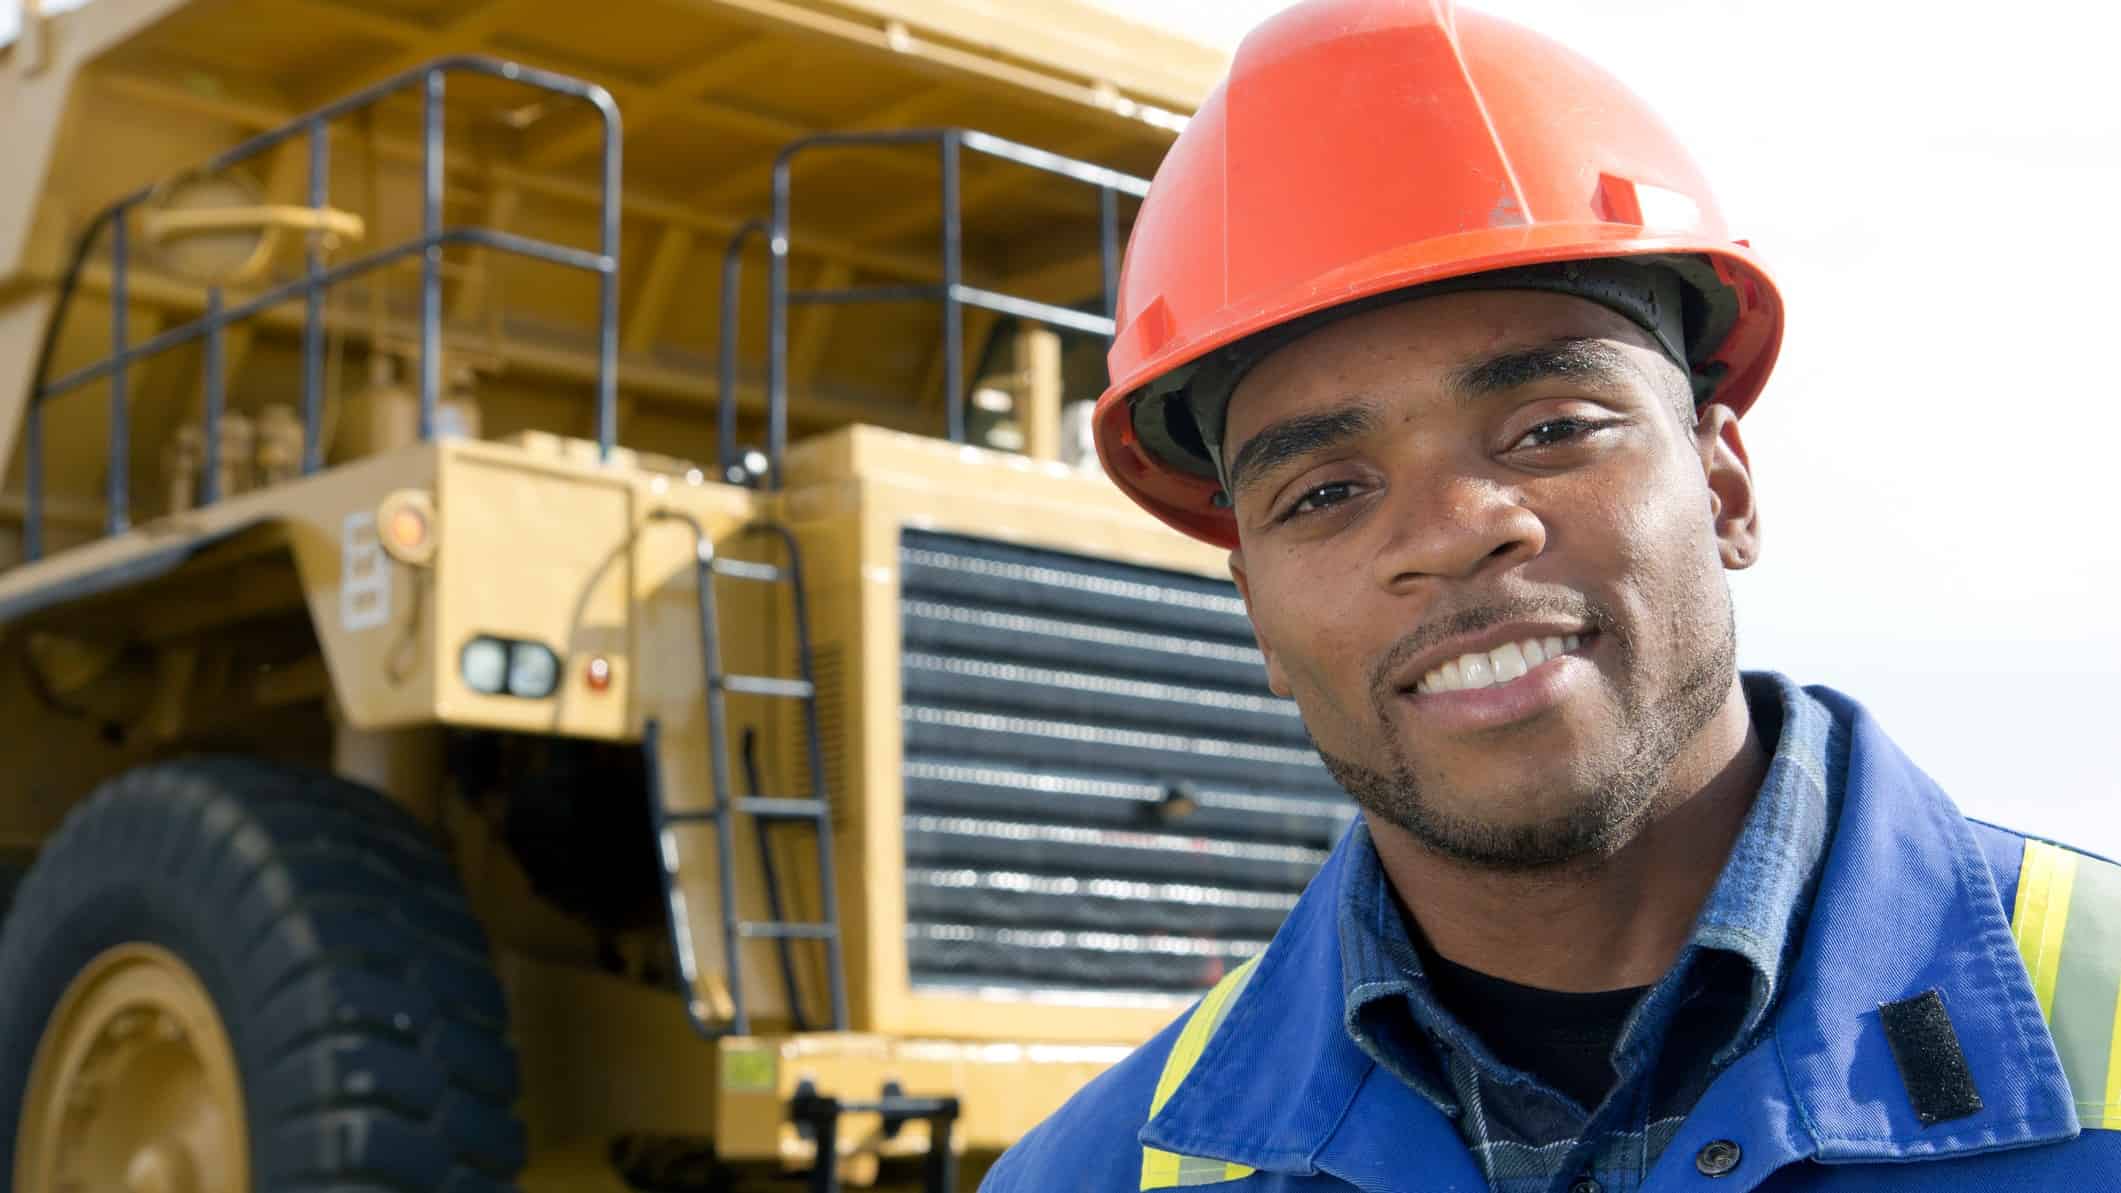 A Paladin Energy miner wearing a hard hat and protective gear stands in front of a large mining truck and smiles to the camera.